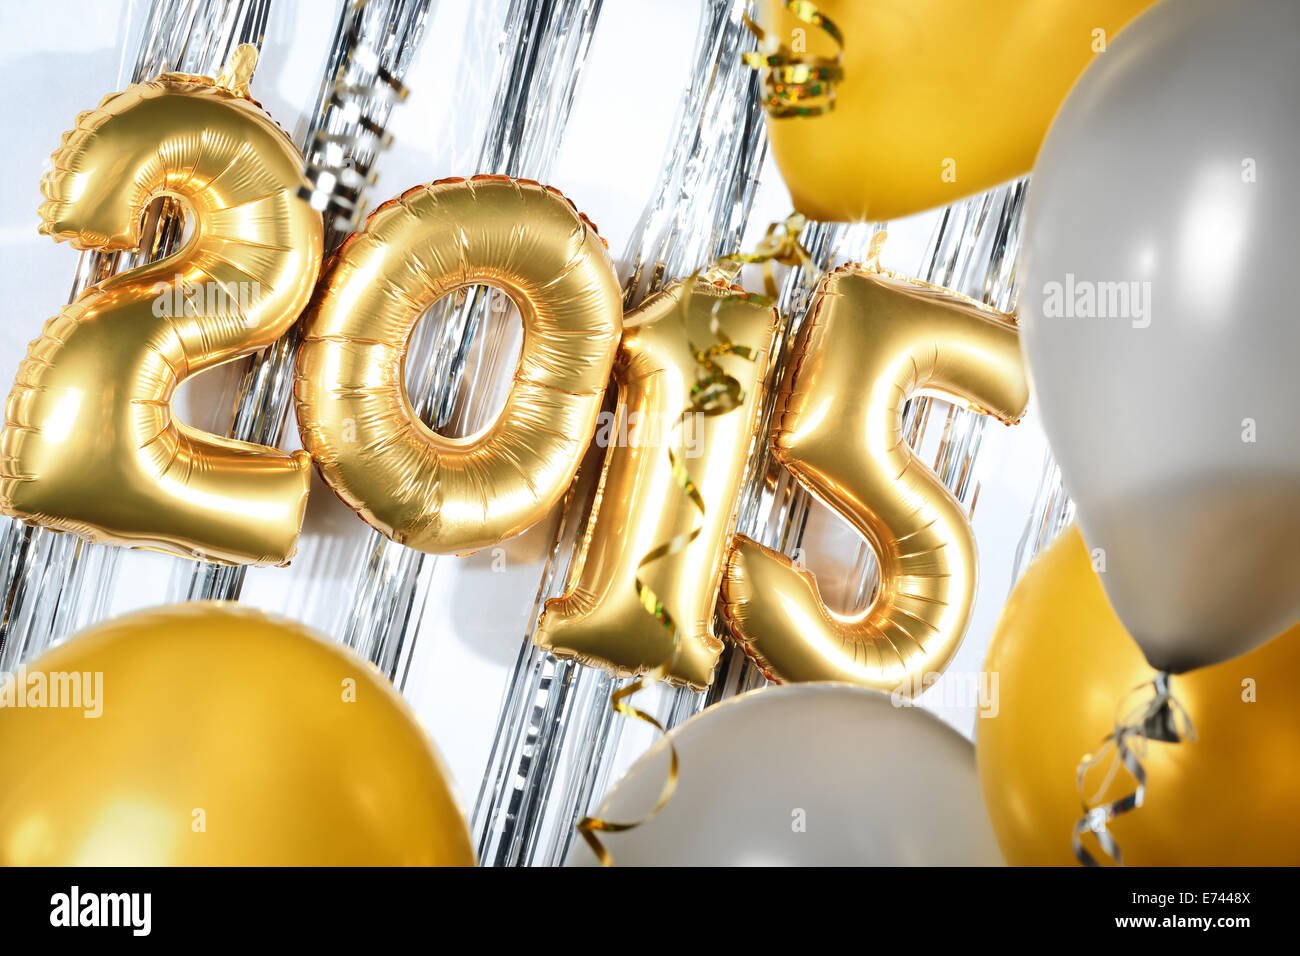 New Year 2015 decorated with balloons Stock Photo